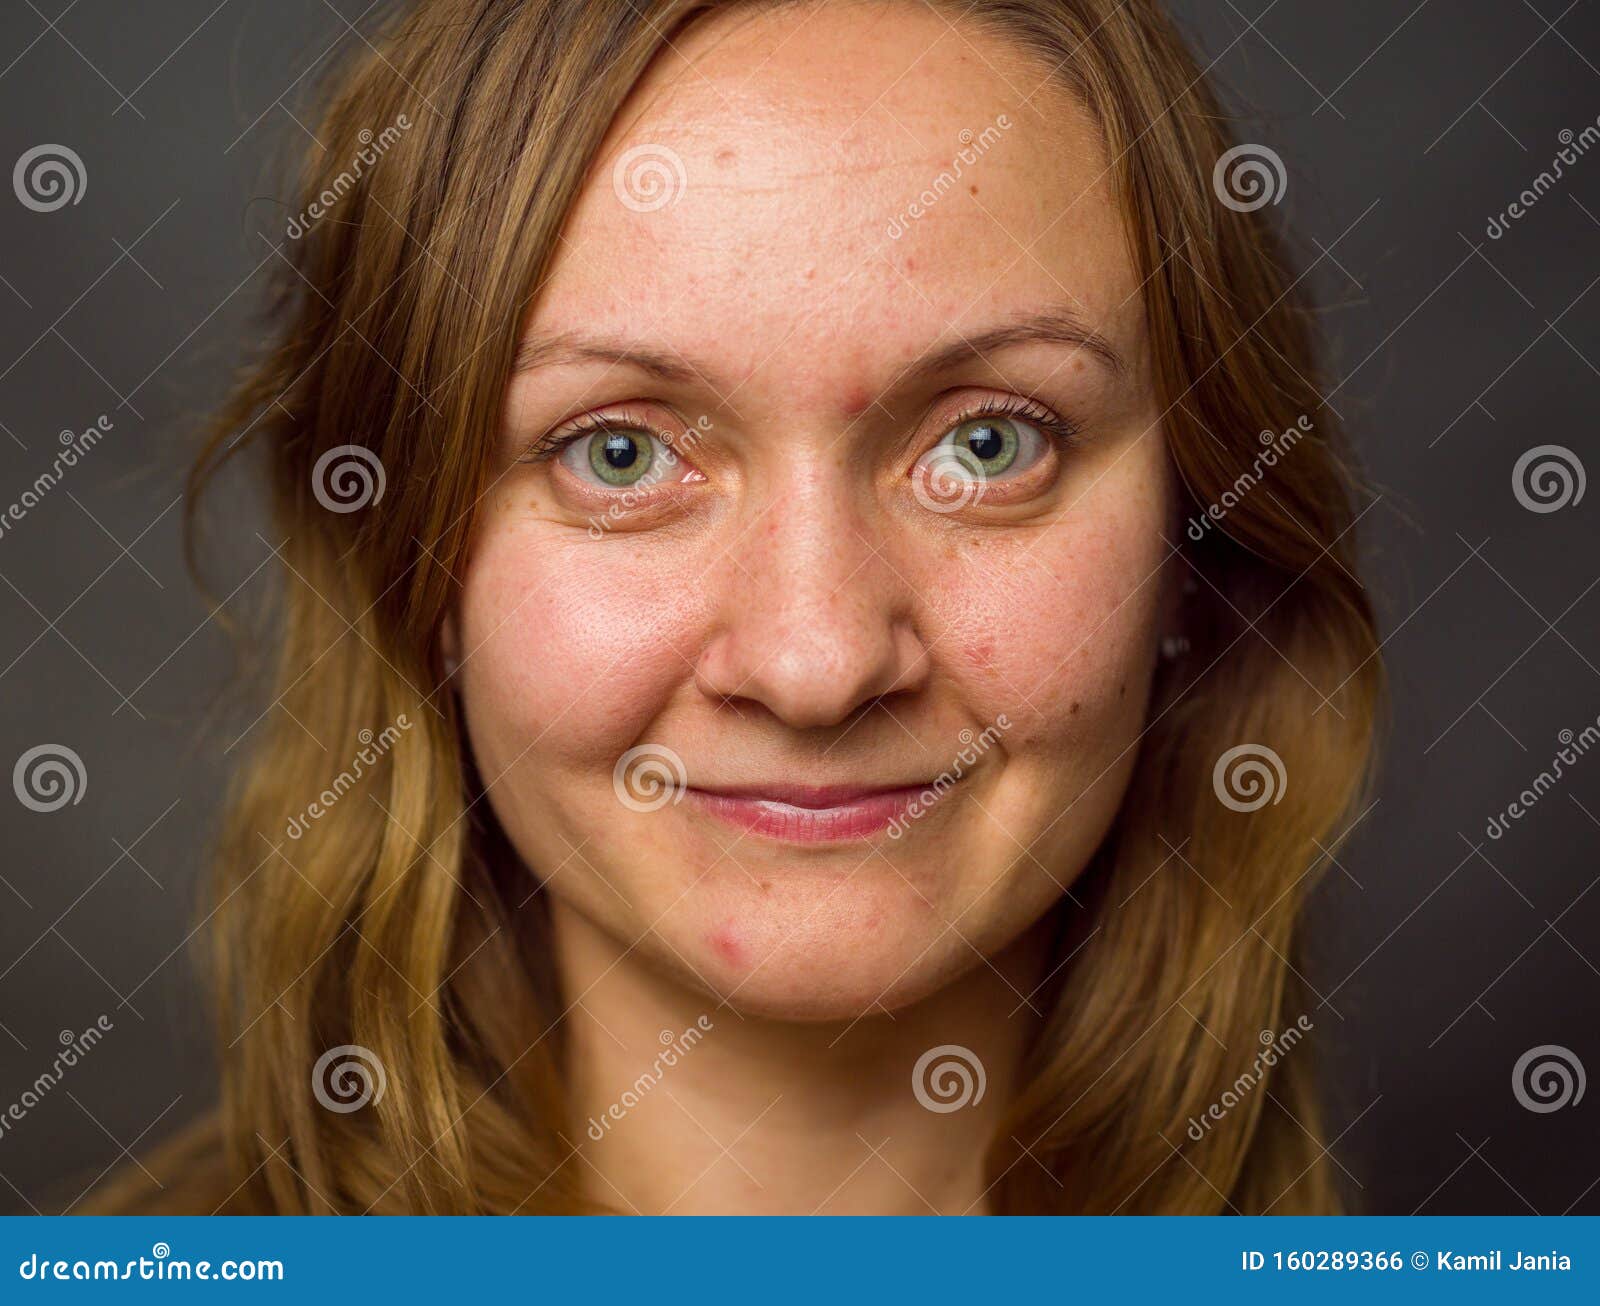 portrait of young woman, no make up, brown dark hair, no retouch making expressions.